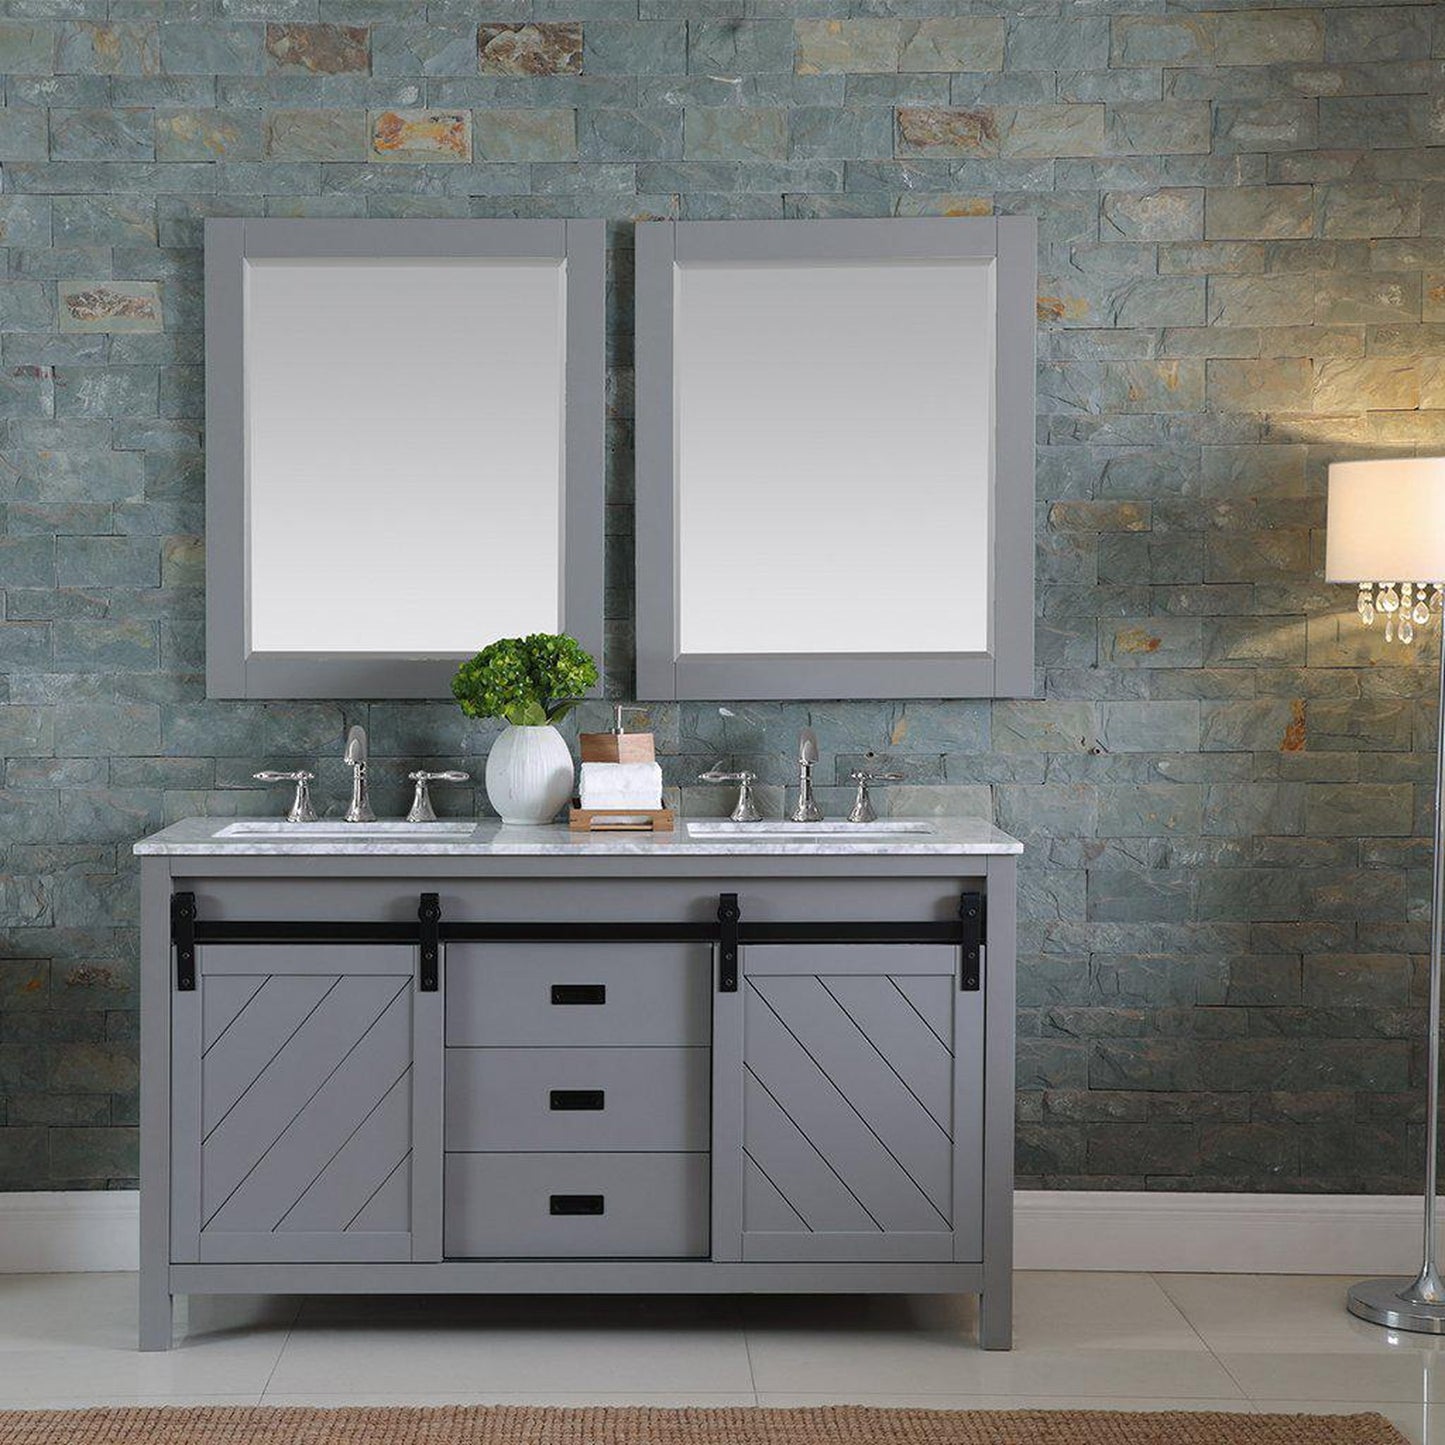 Altair Kinsley 60" Double Gray Freestanding Bathroom Vanity Set With Mirror, Natural Carrara White Marble Top, Two Rectangular Undermount Ceramic Sinks, and Overflow